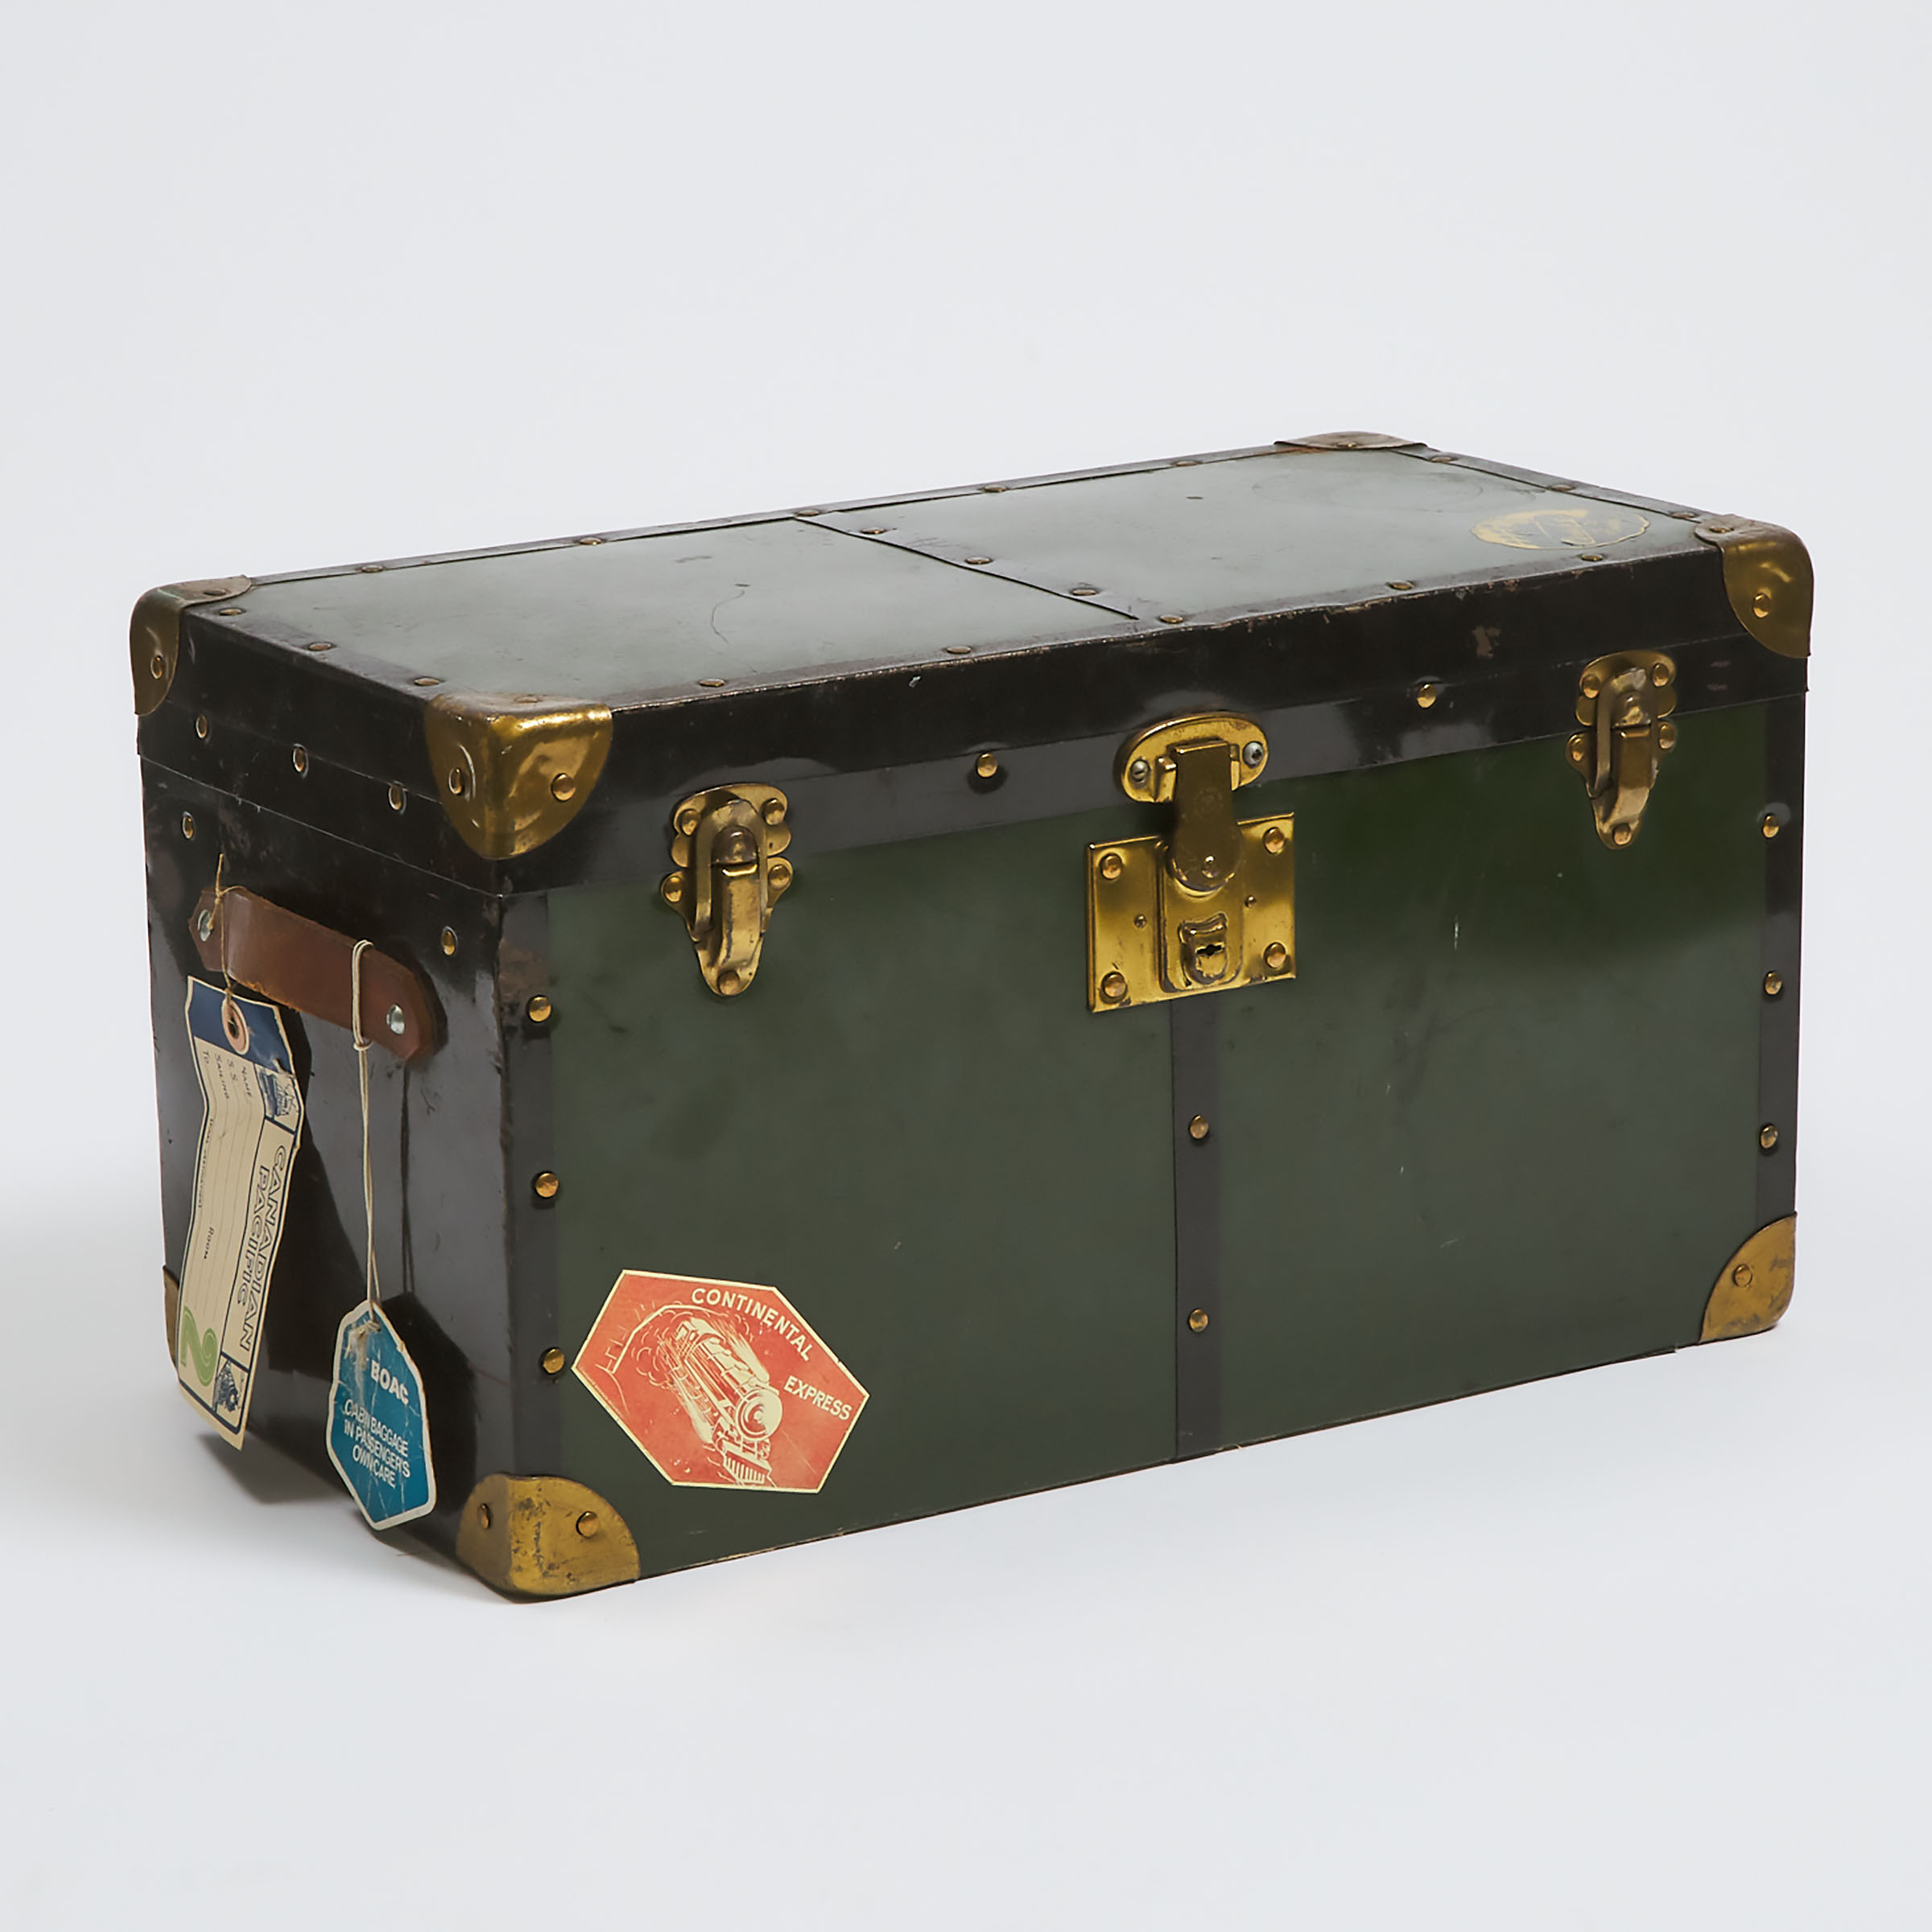 American Child's Steamer Trunk, Eagle Lock Co., Terryville, Conn., c.1920